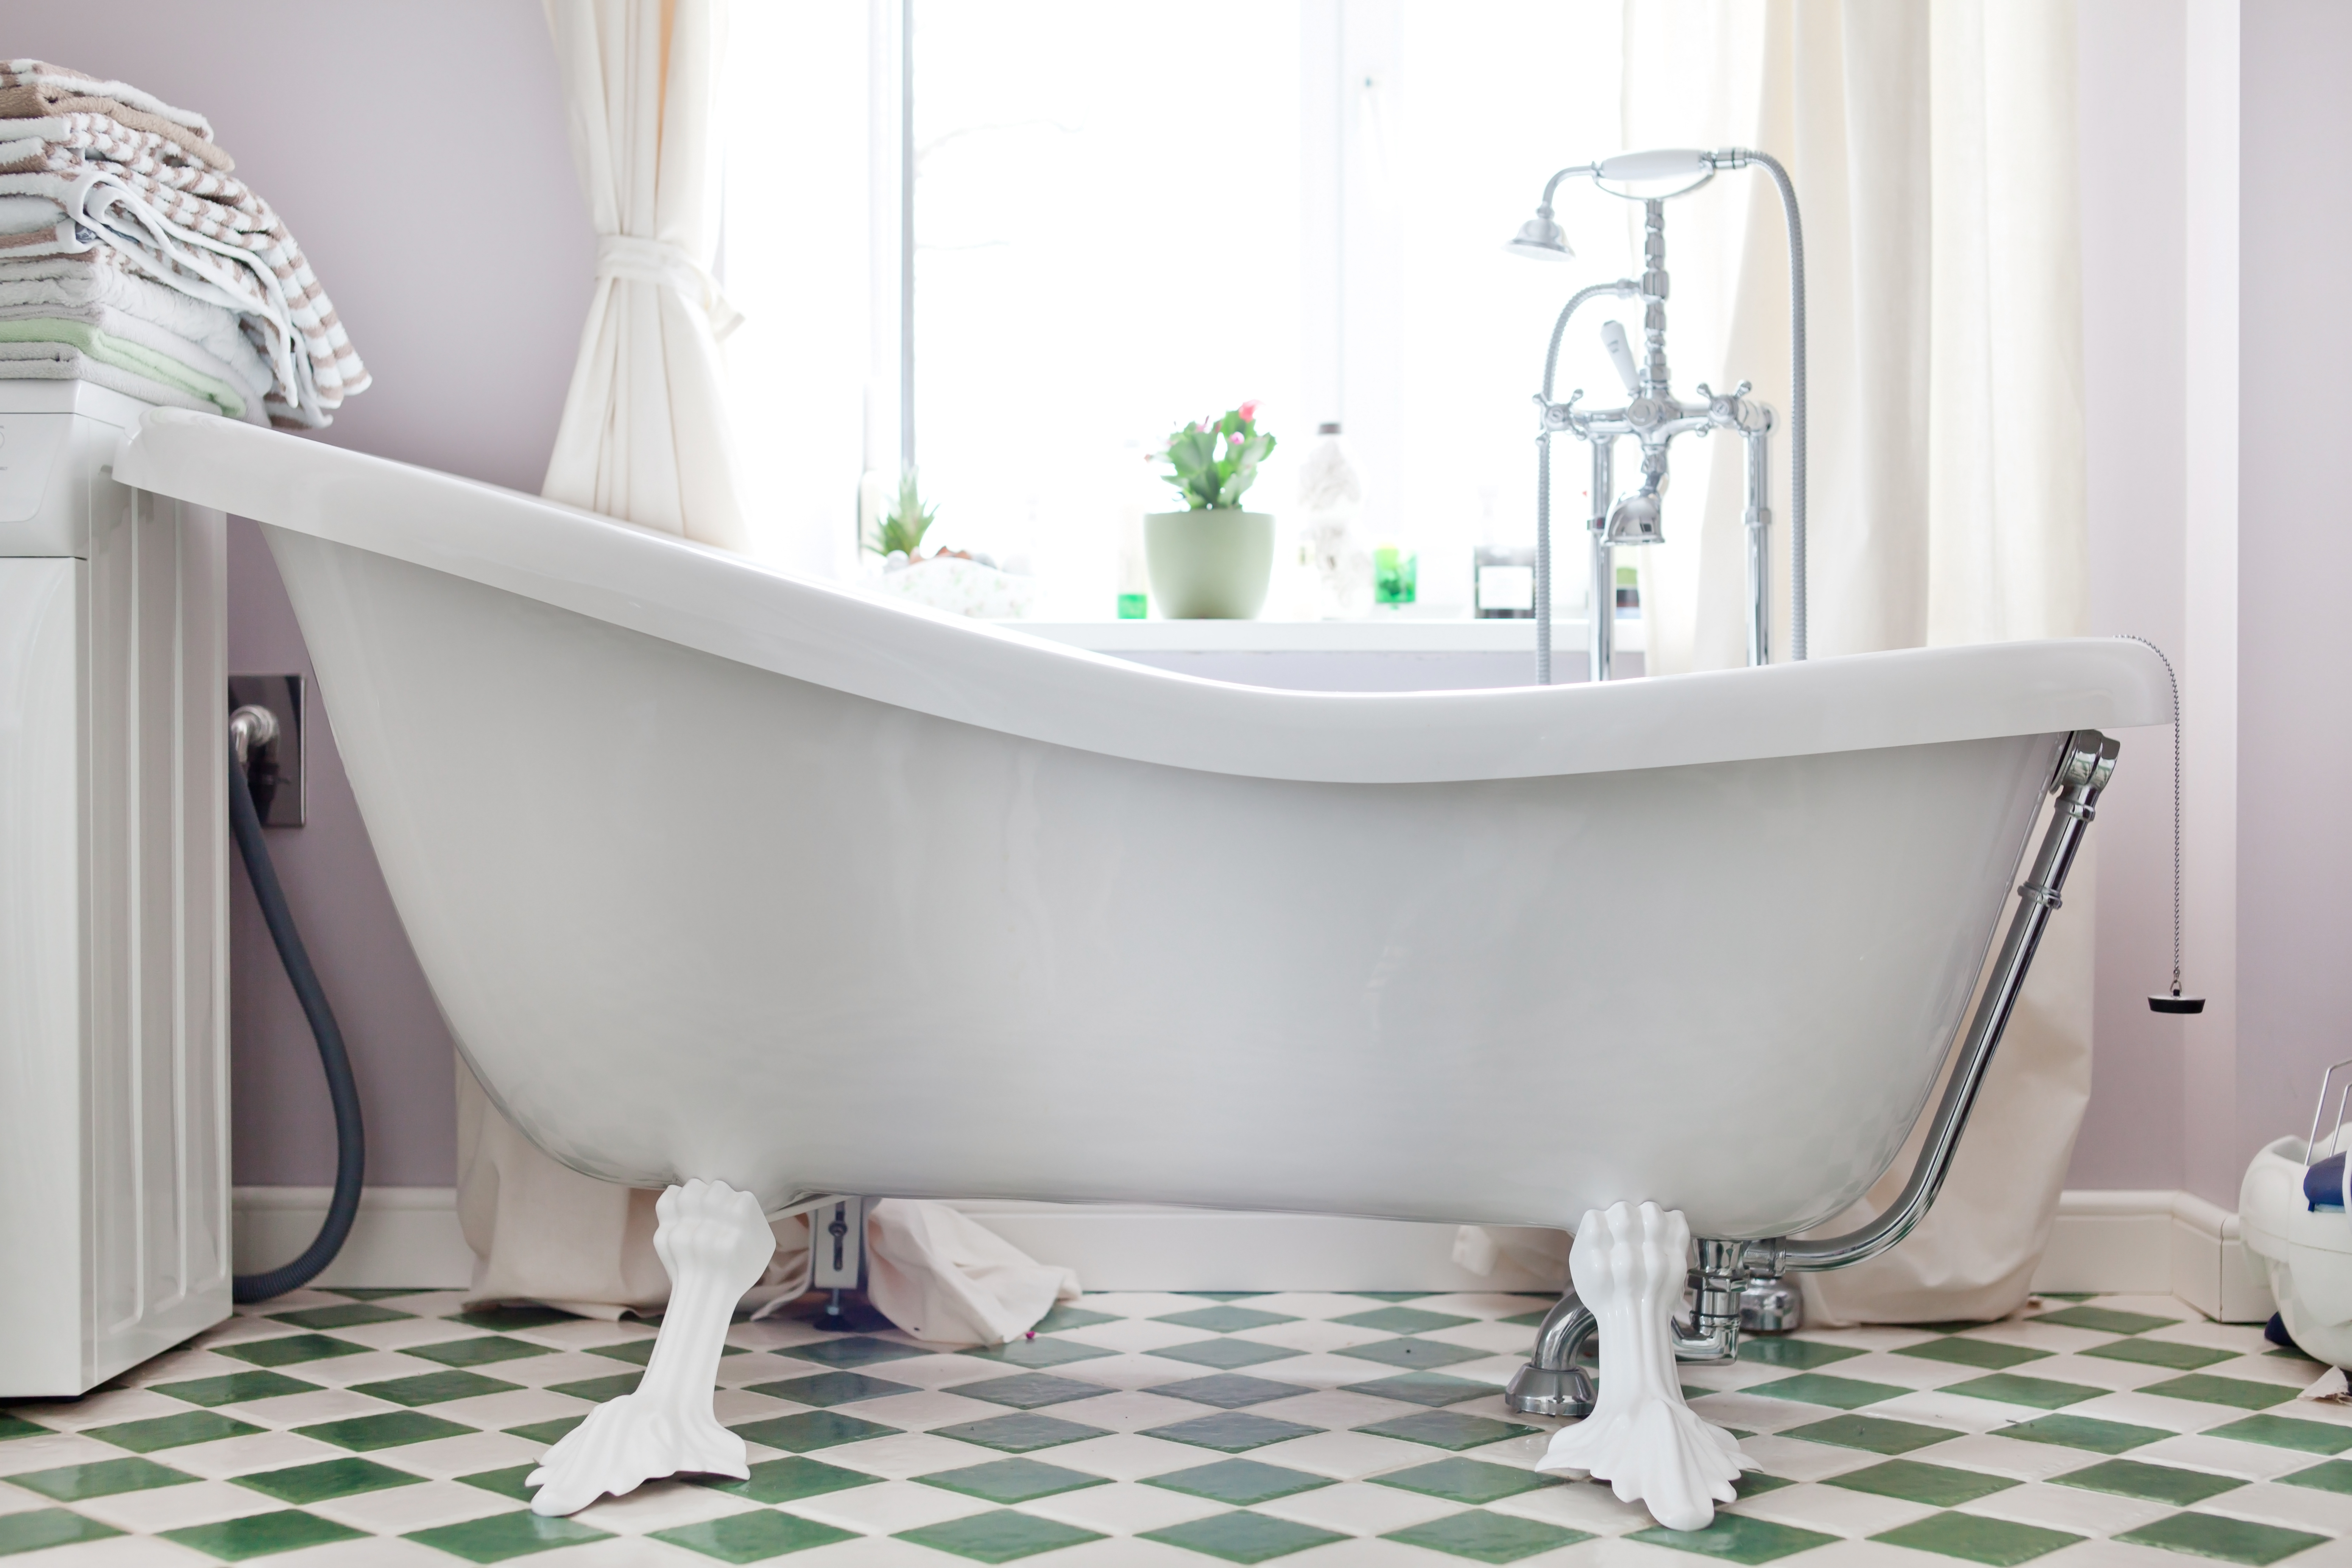 Liven up your bathroom this Spring!